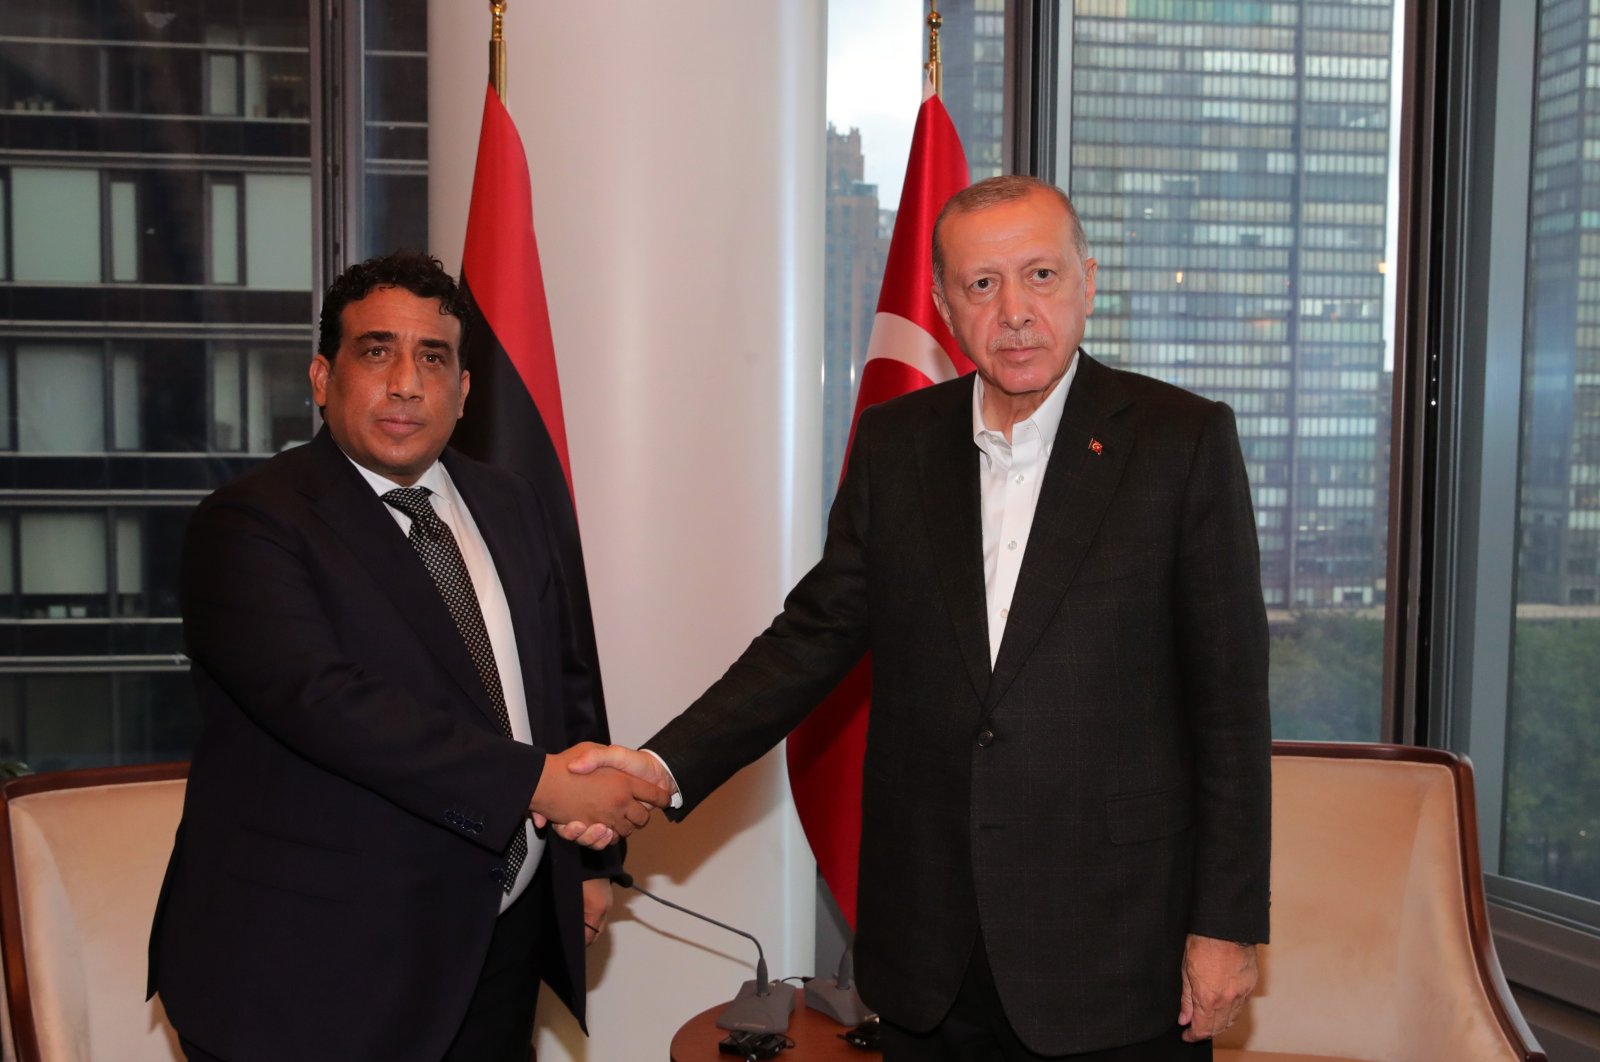 President Recep Tayyip Erdoğan shakes hands with the chairperson of the Presidential Council of Libya, Mohammad Younes Menfi, New York, U.S., Sept. 23, 2021. (IHA Photo)